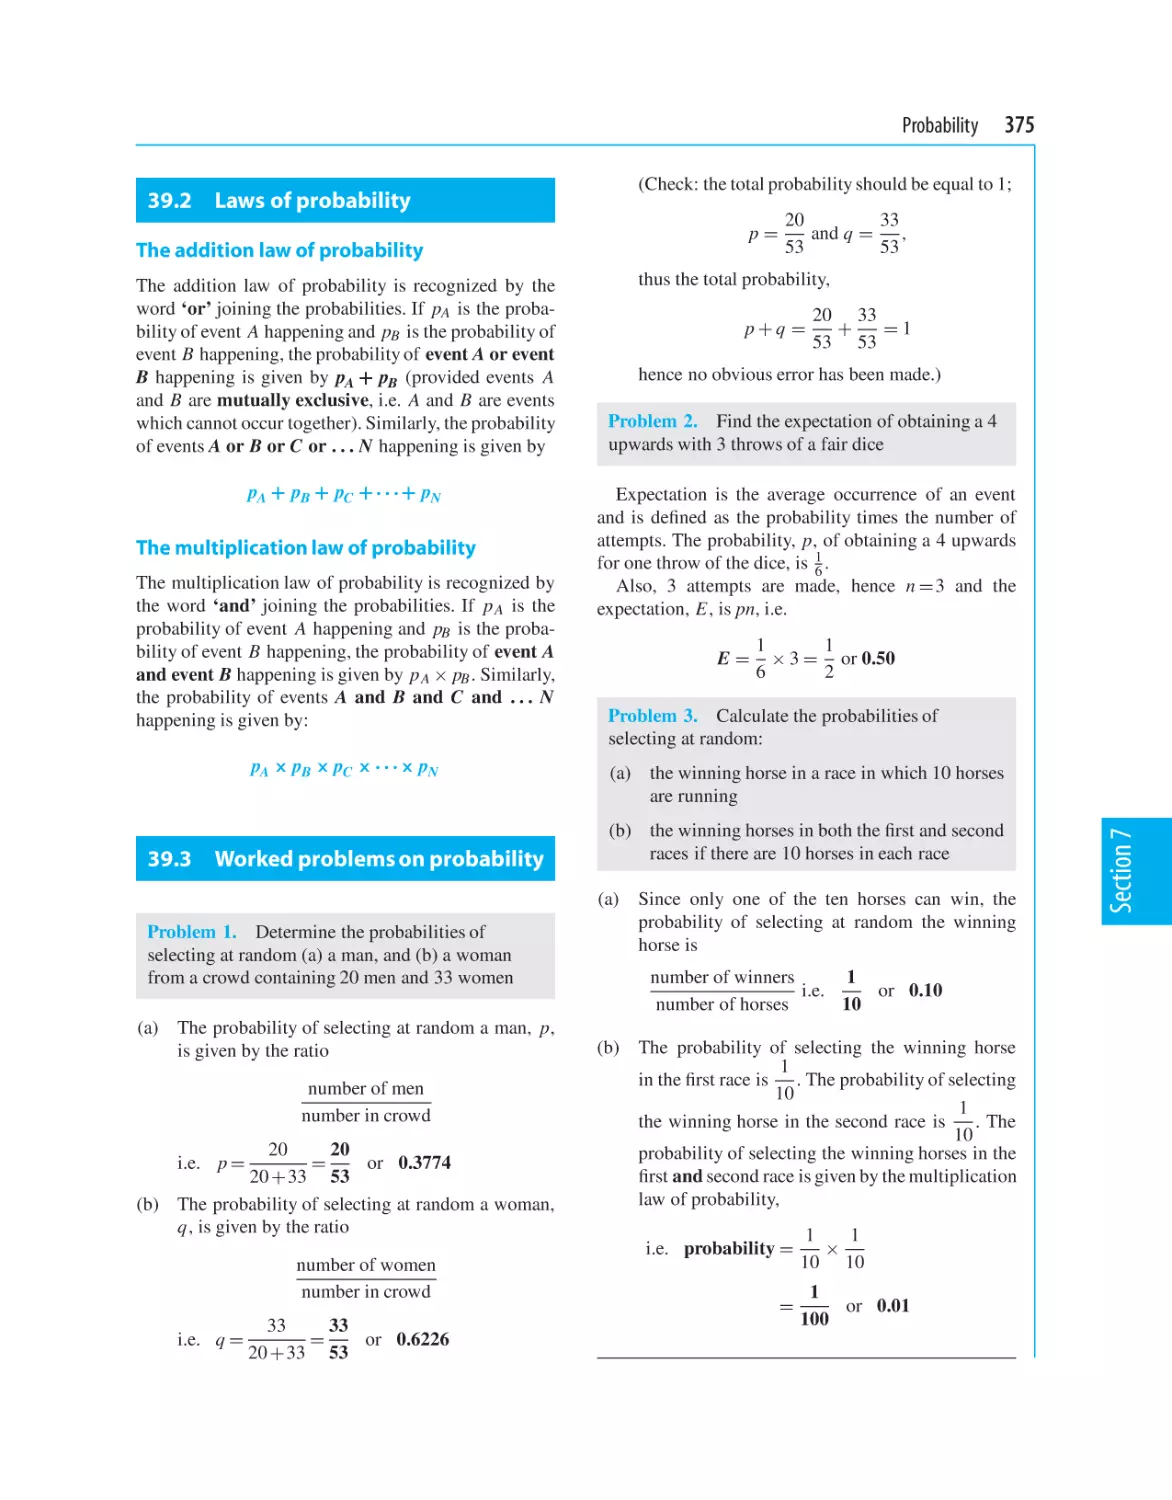 39.2 Laws of probability
39.3 Worked problems on probability